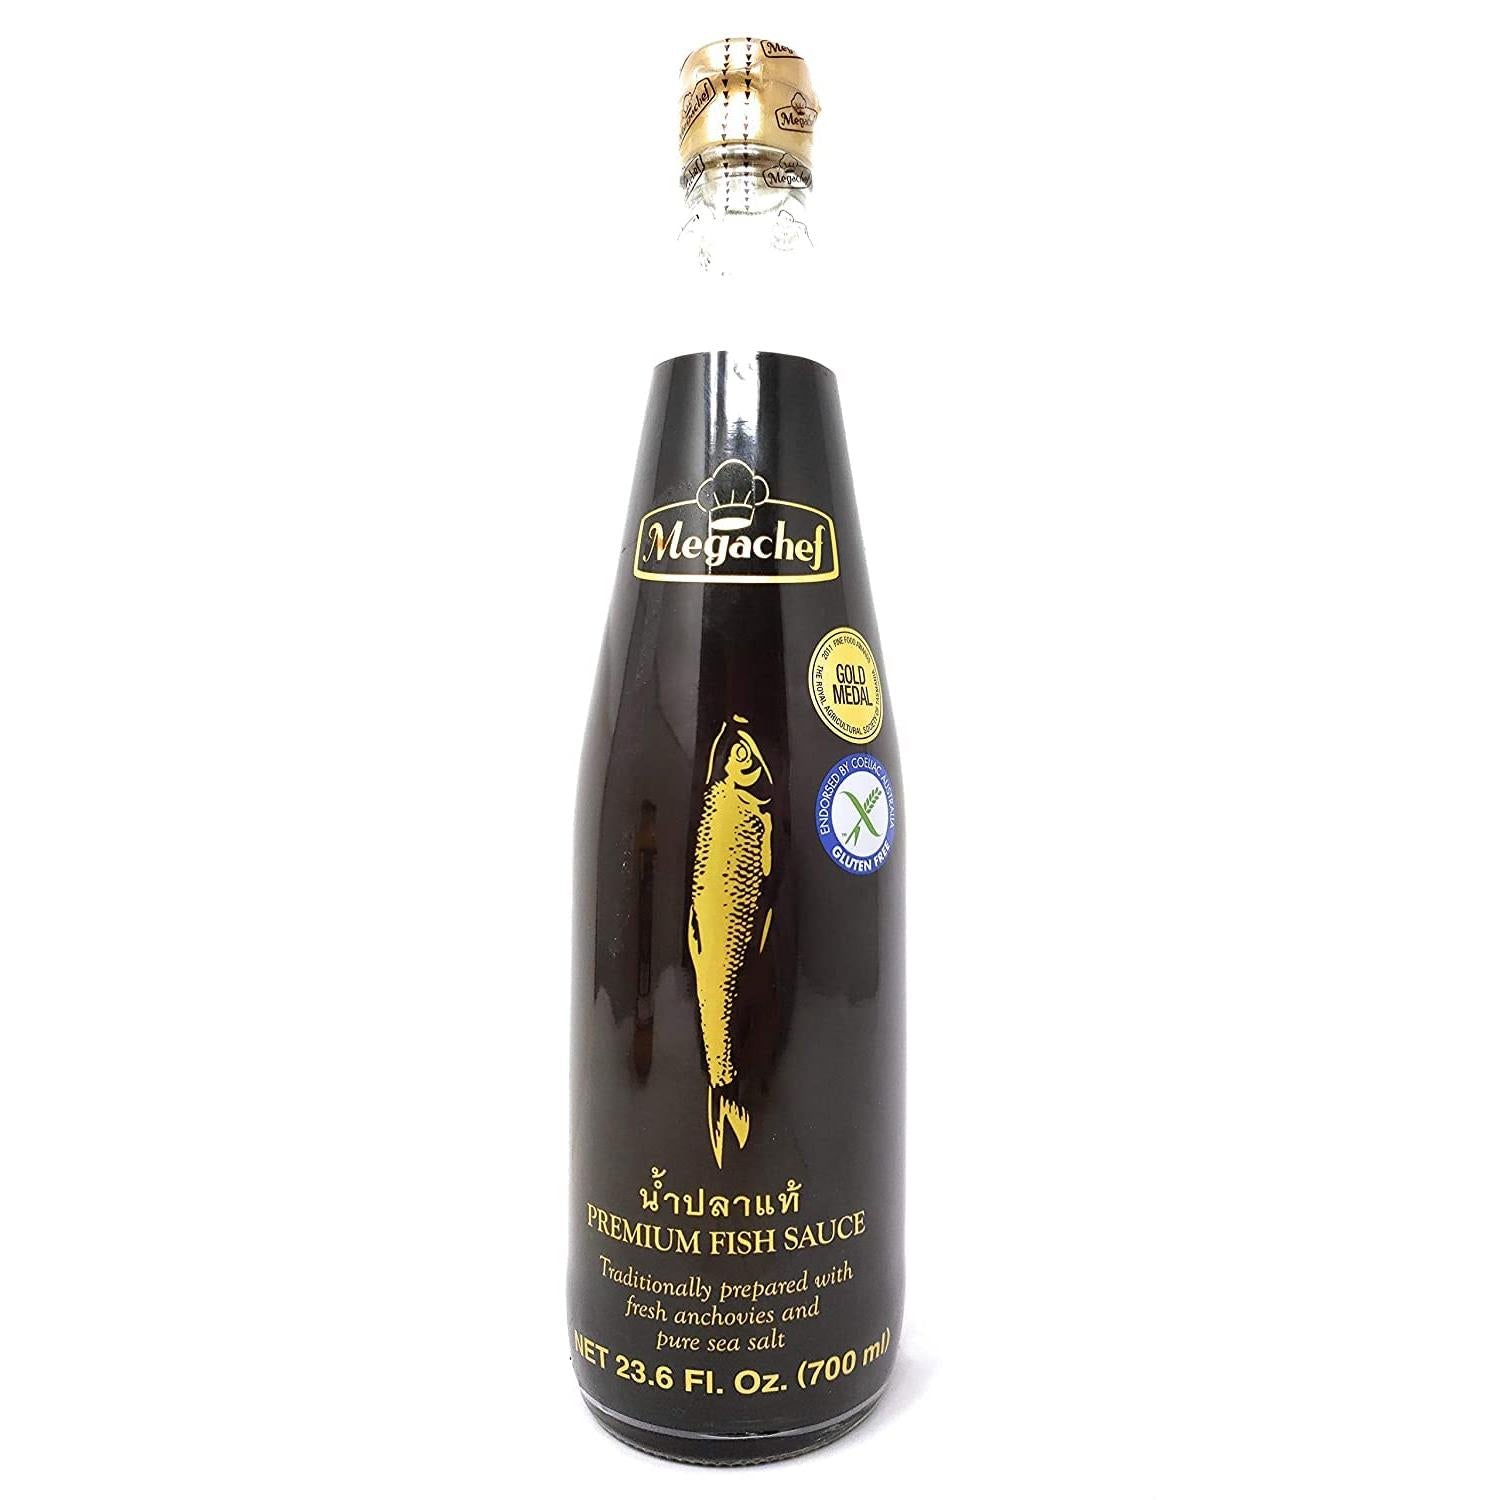 Megachef All Natural Premium Fish Sauce in New Improved Packaging (23.6 fl. oz. - 700 ml) (2 Bottles)